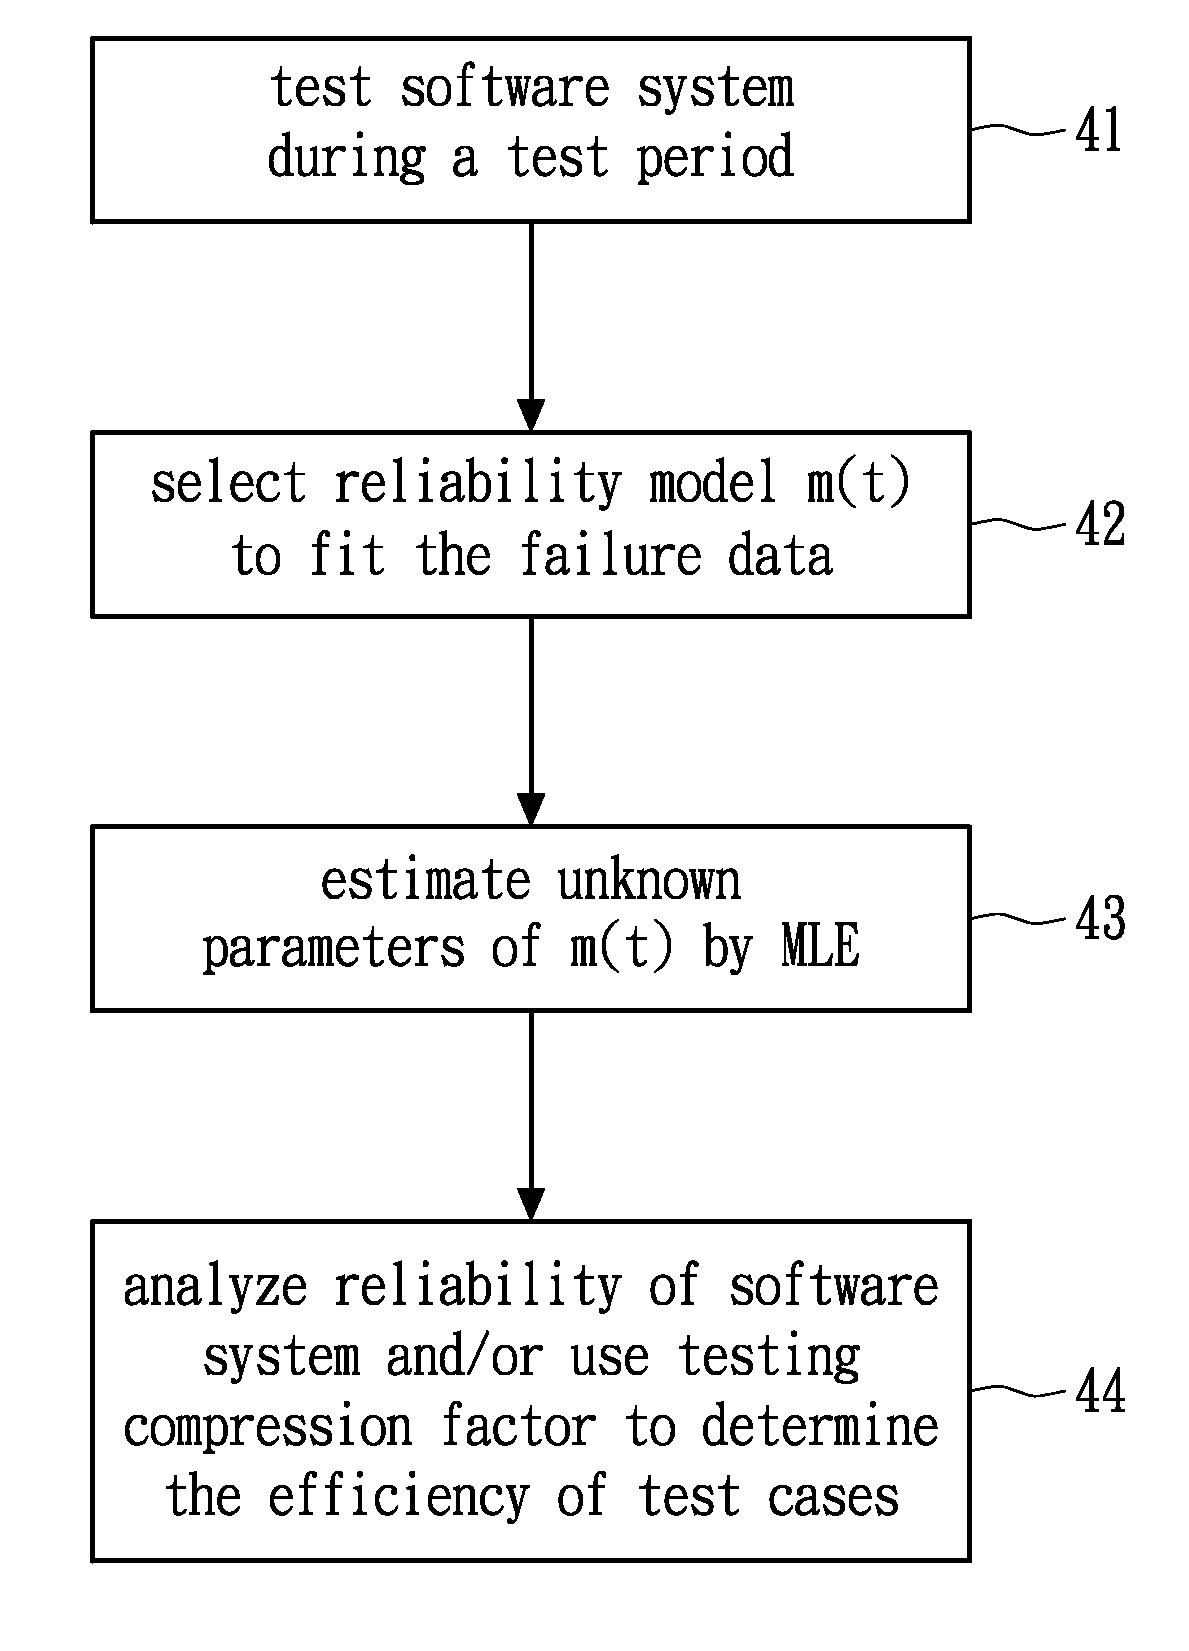 Method and system for assessing and analyzing software reliability